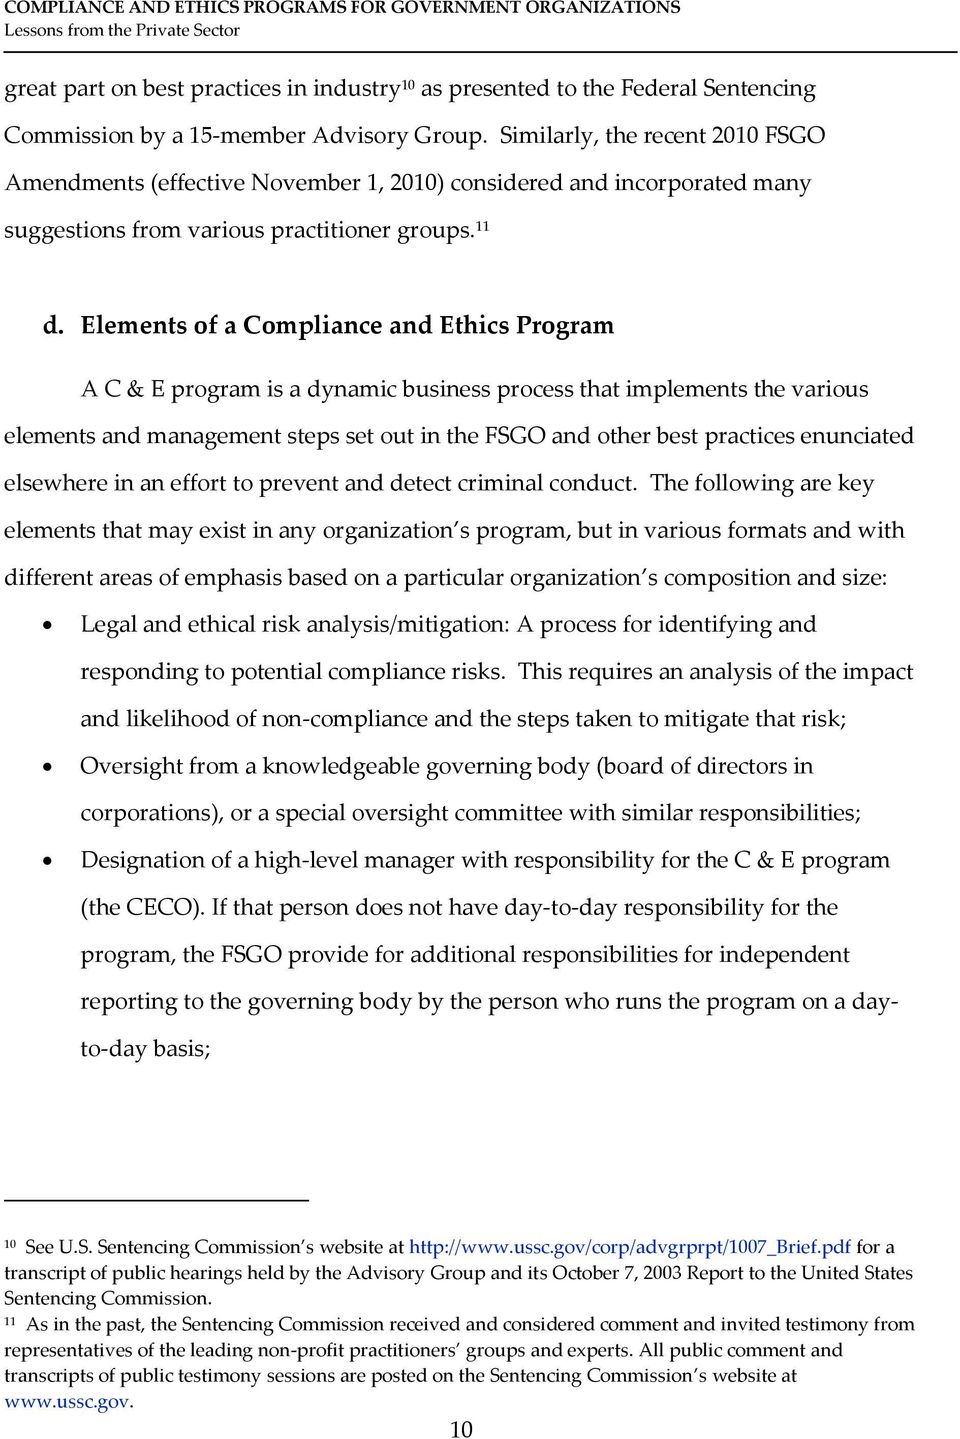 Elements of a Compliance and Ethics Program A C & E program is a dynamic business process that implements the various elements and management steps set out in the FSGO and other best practices